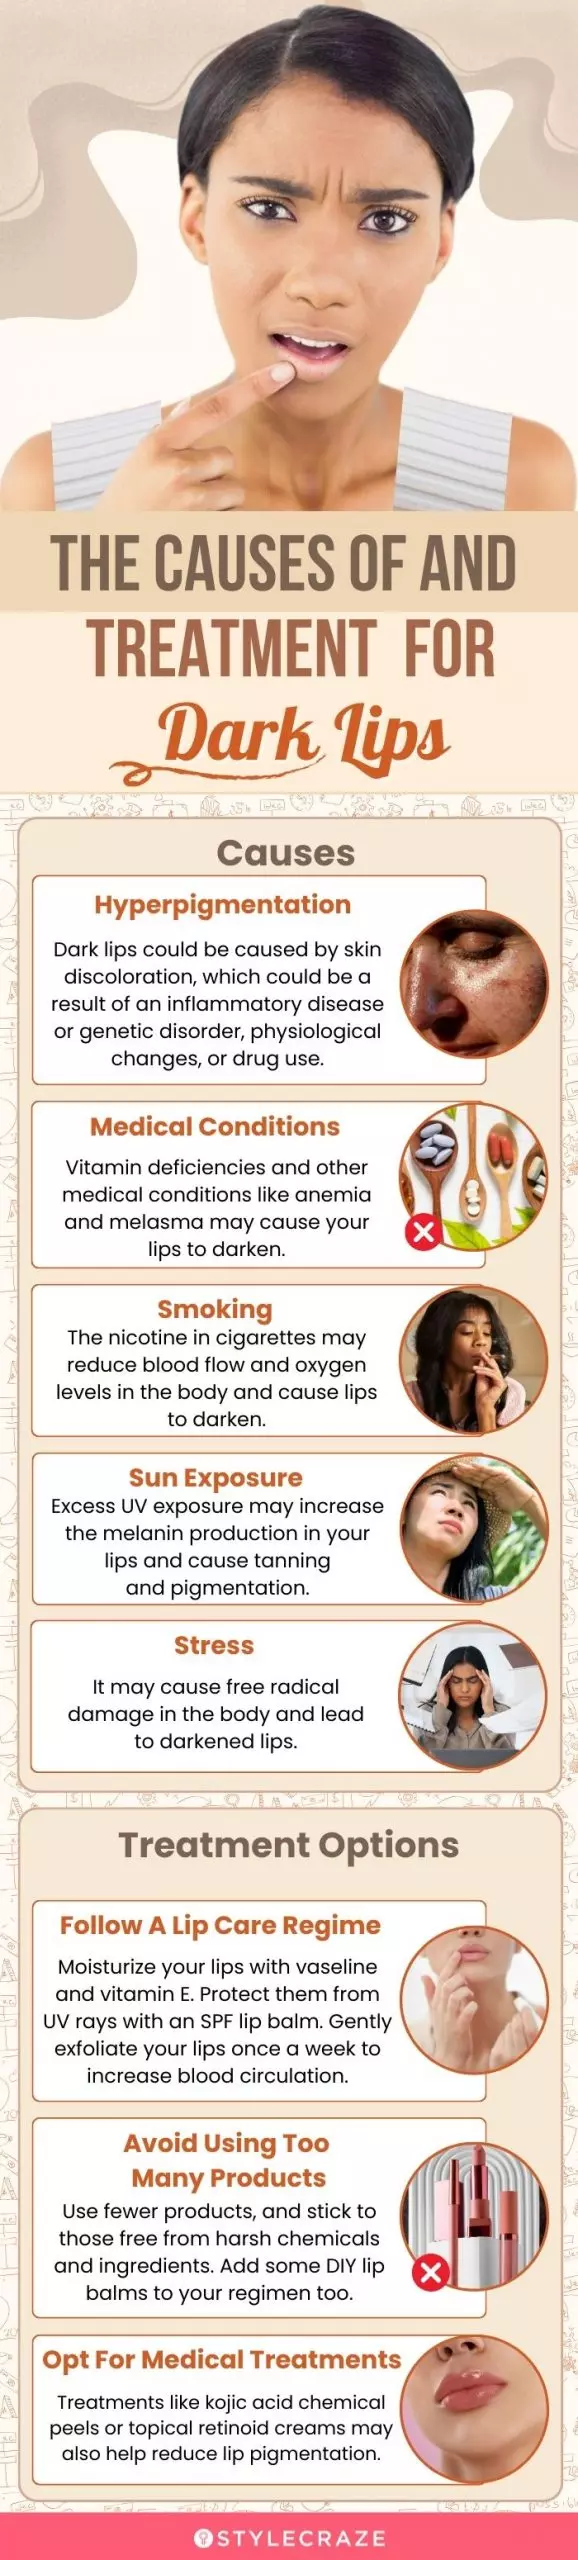 dark lips causes and treatment (infographic)